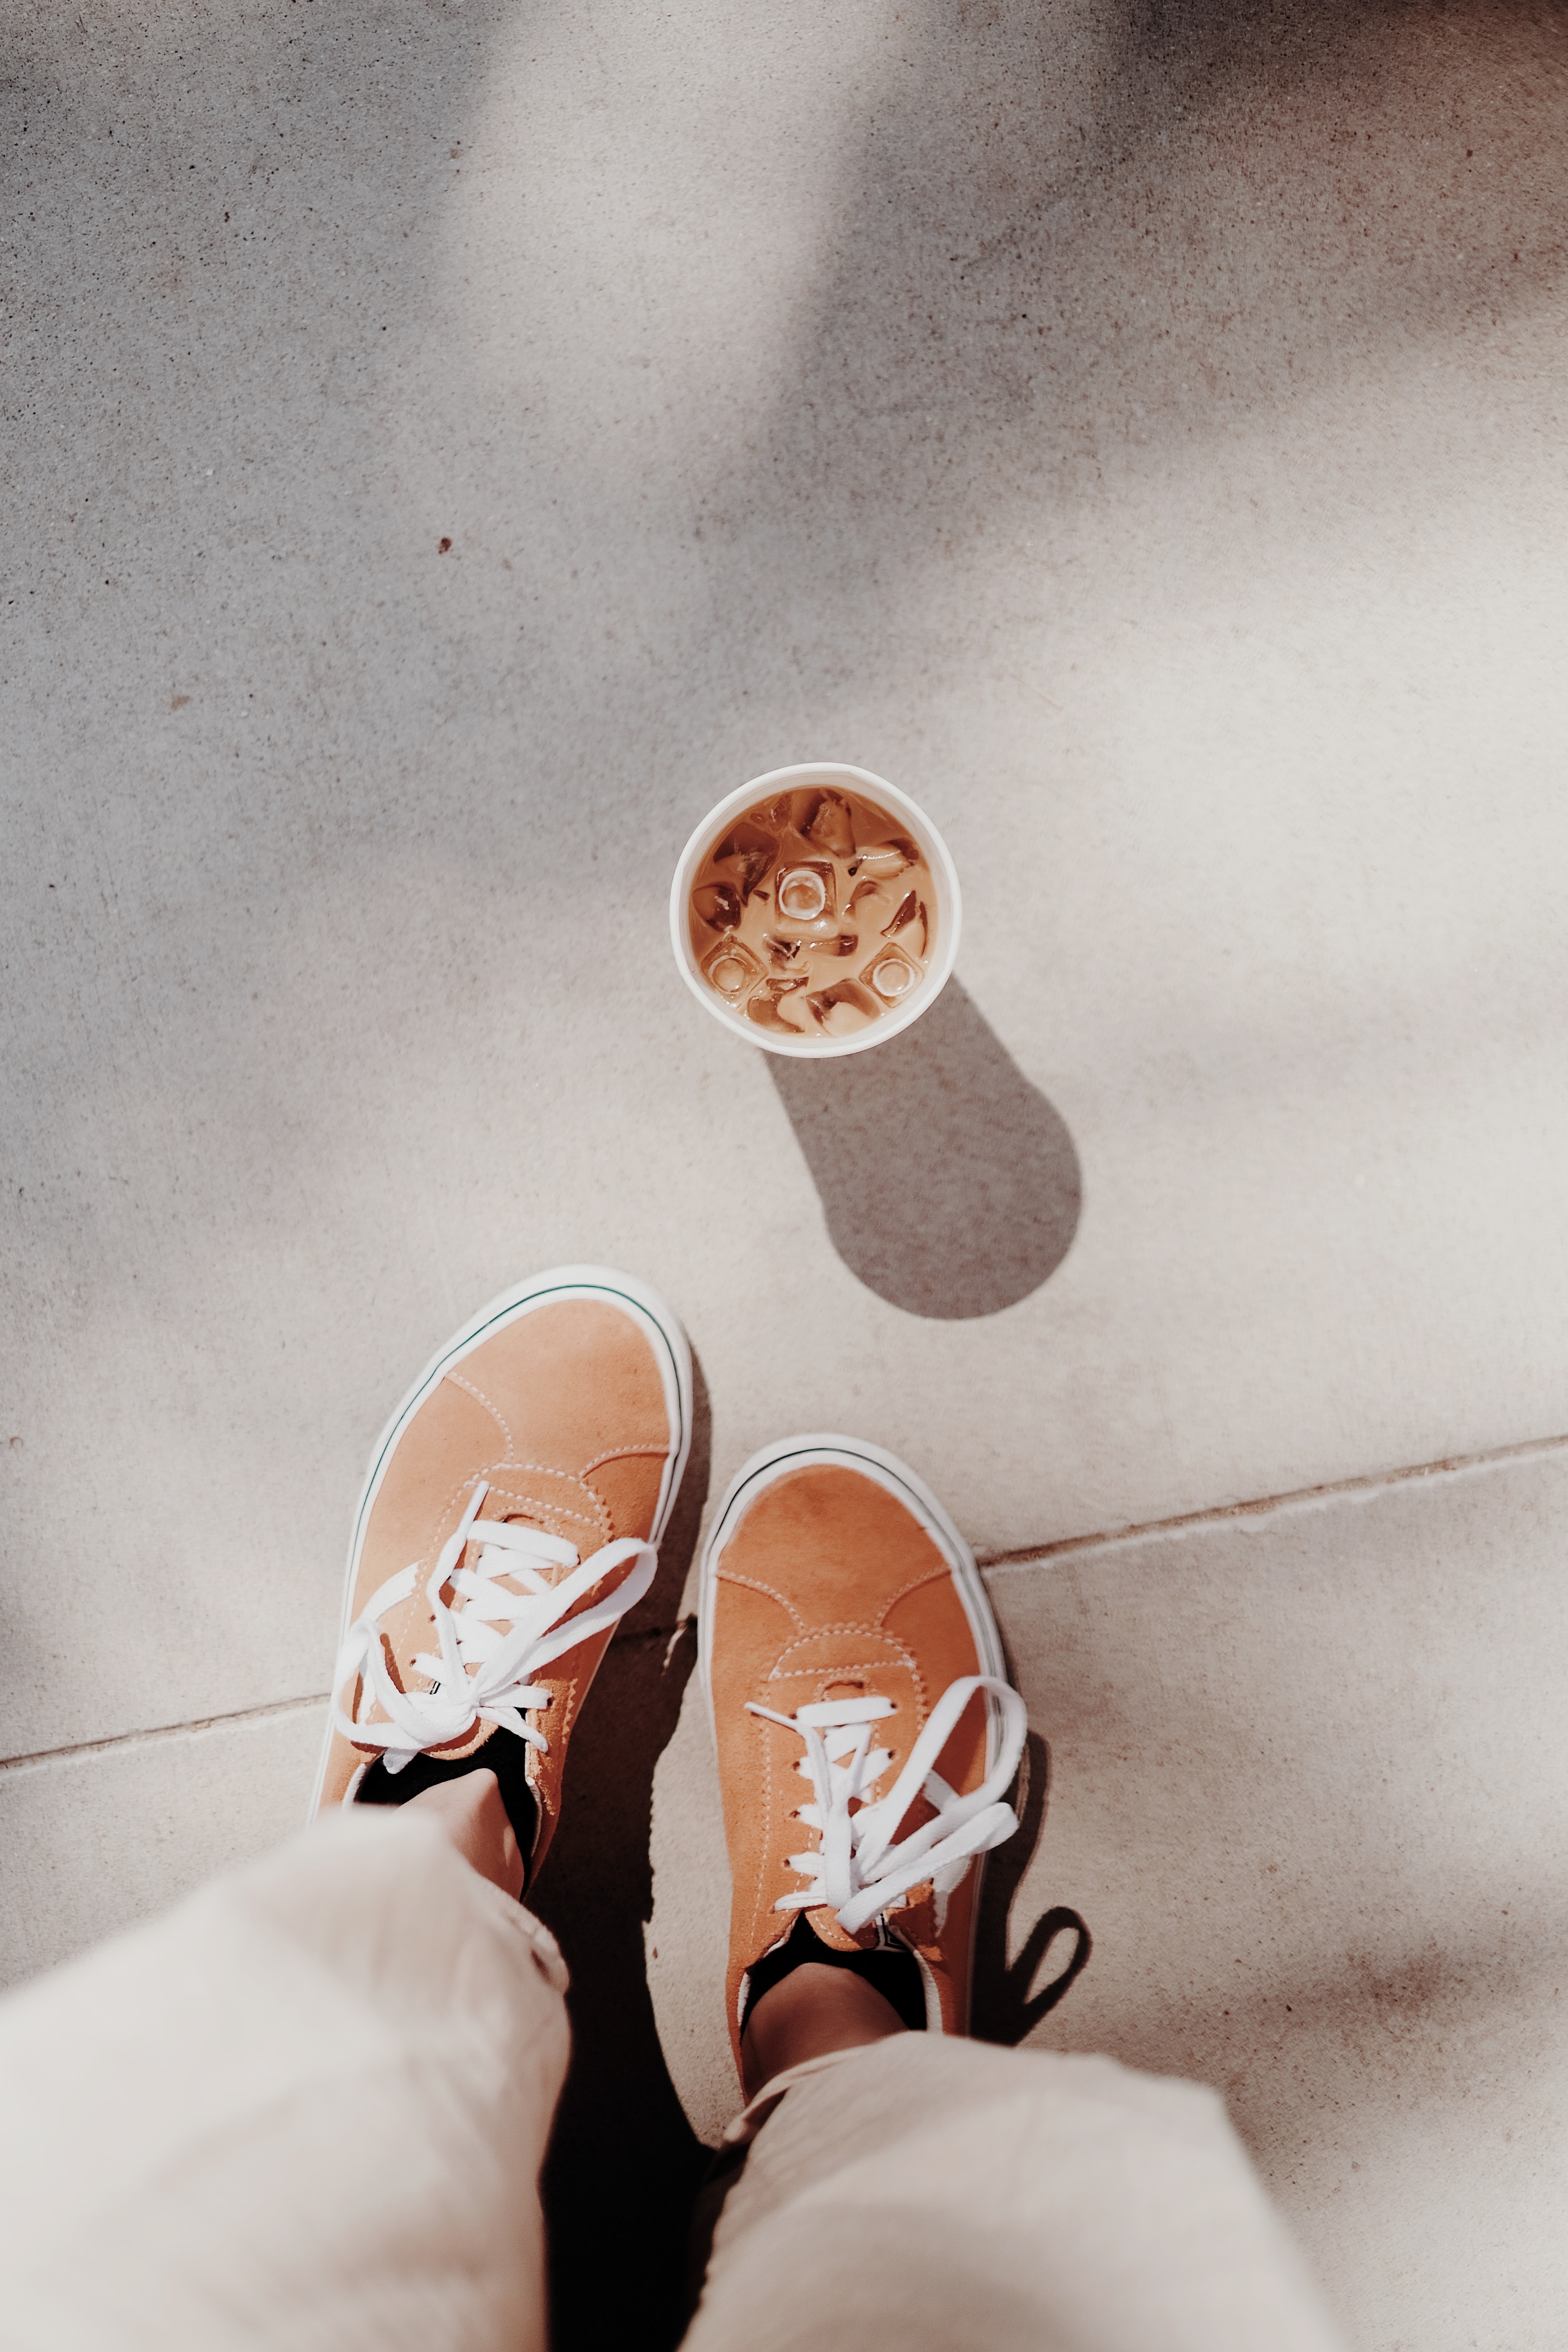 Mobile wallpaper shoes, ice, coffee, miscellanea, miscellaneous, legs, sneakers, drink, beverage